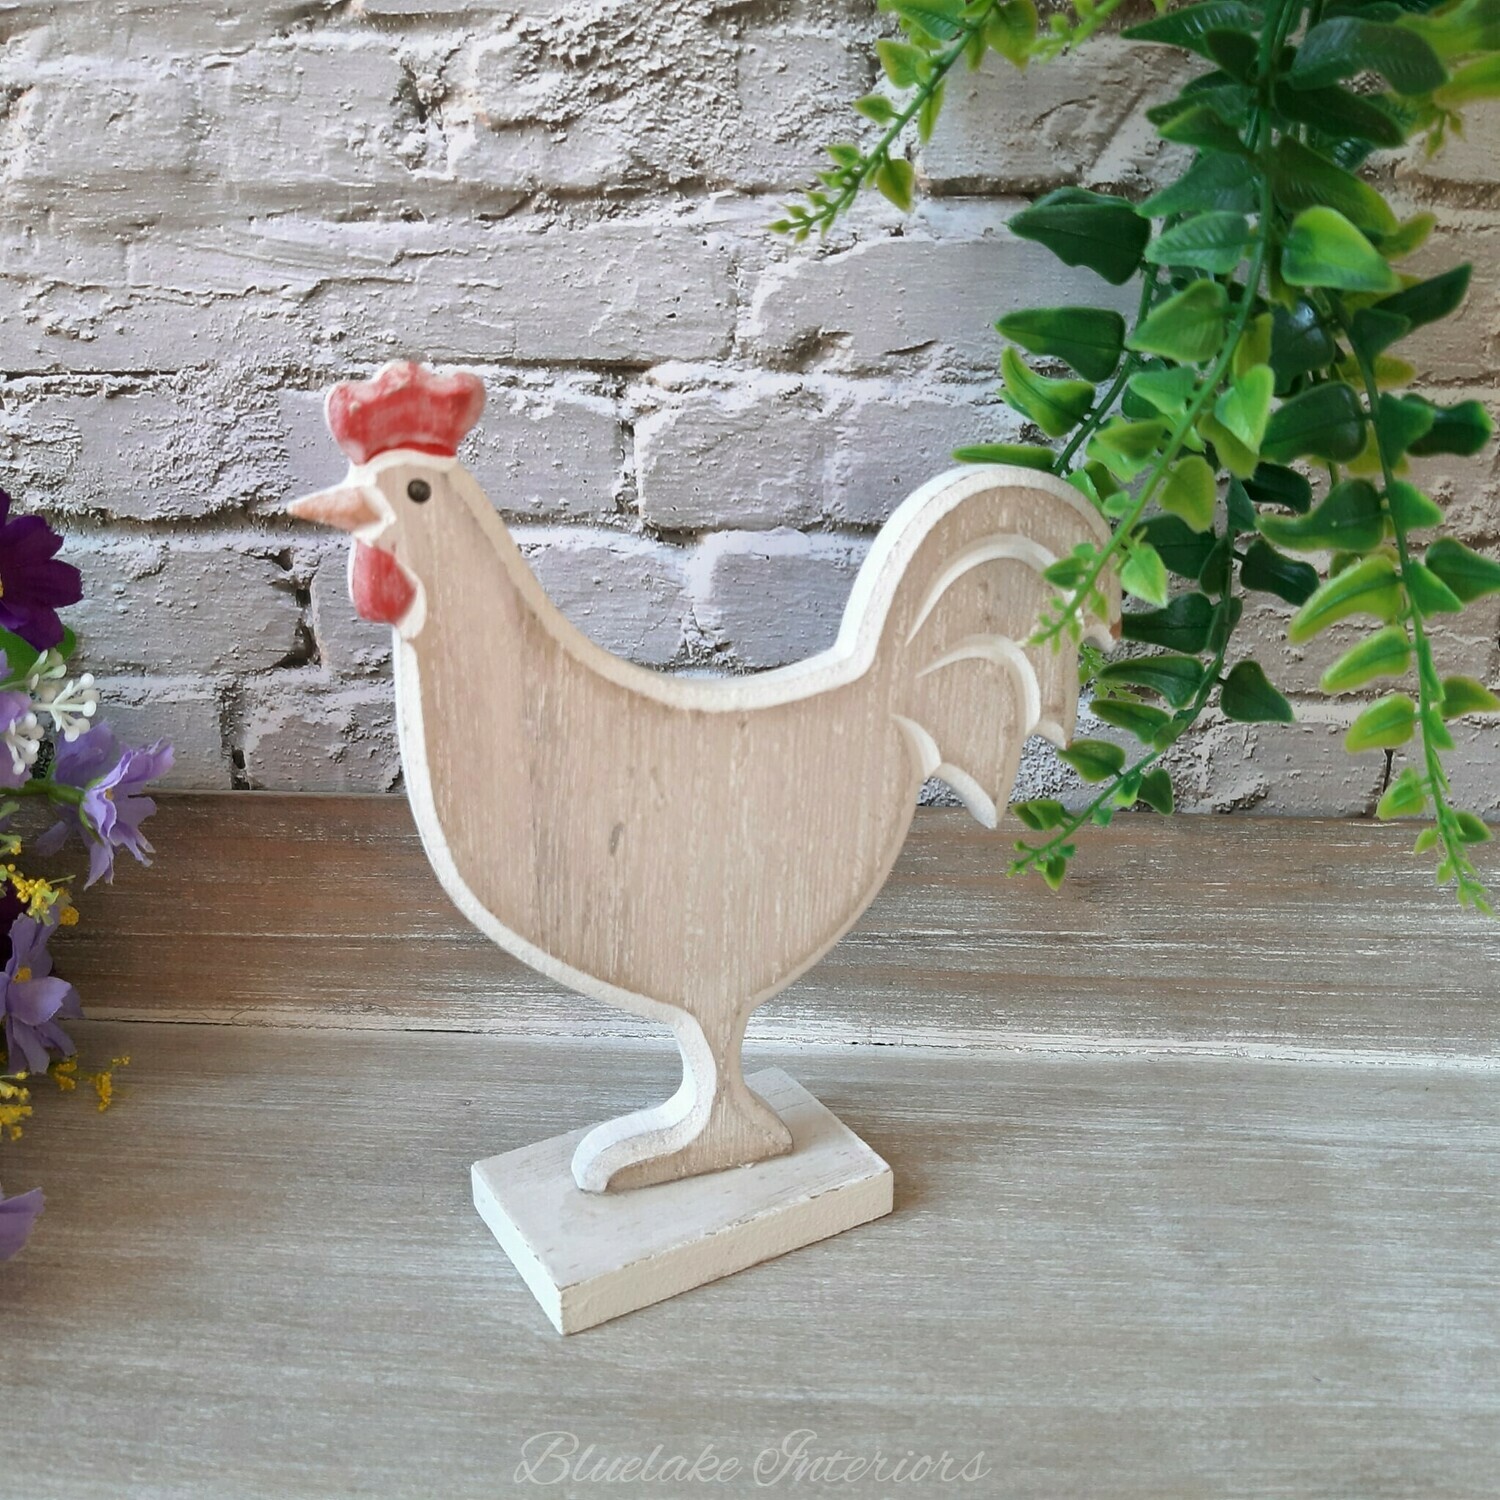 Small Wooden Whitewashed Chicken Figure